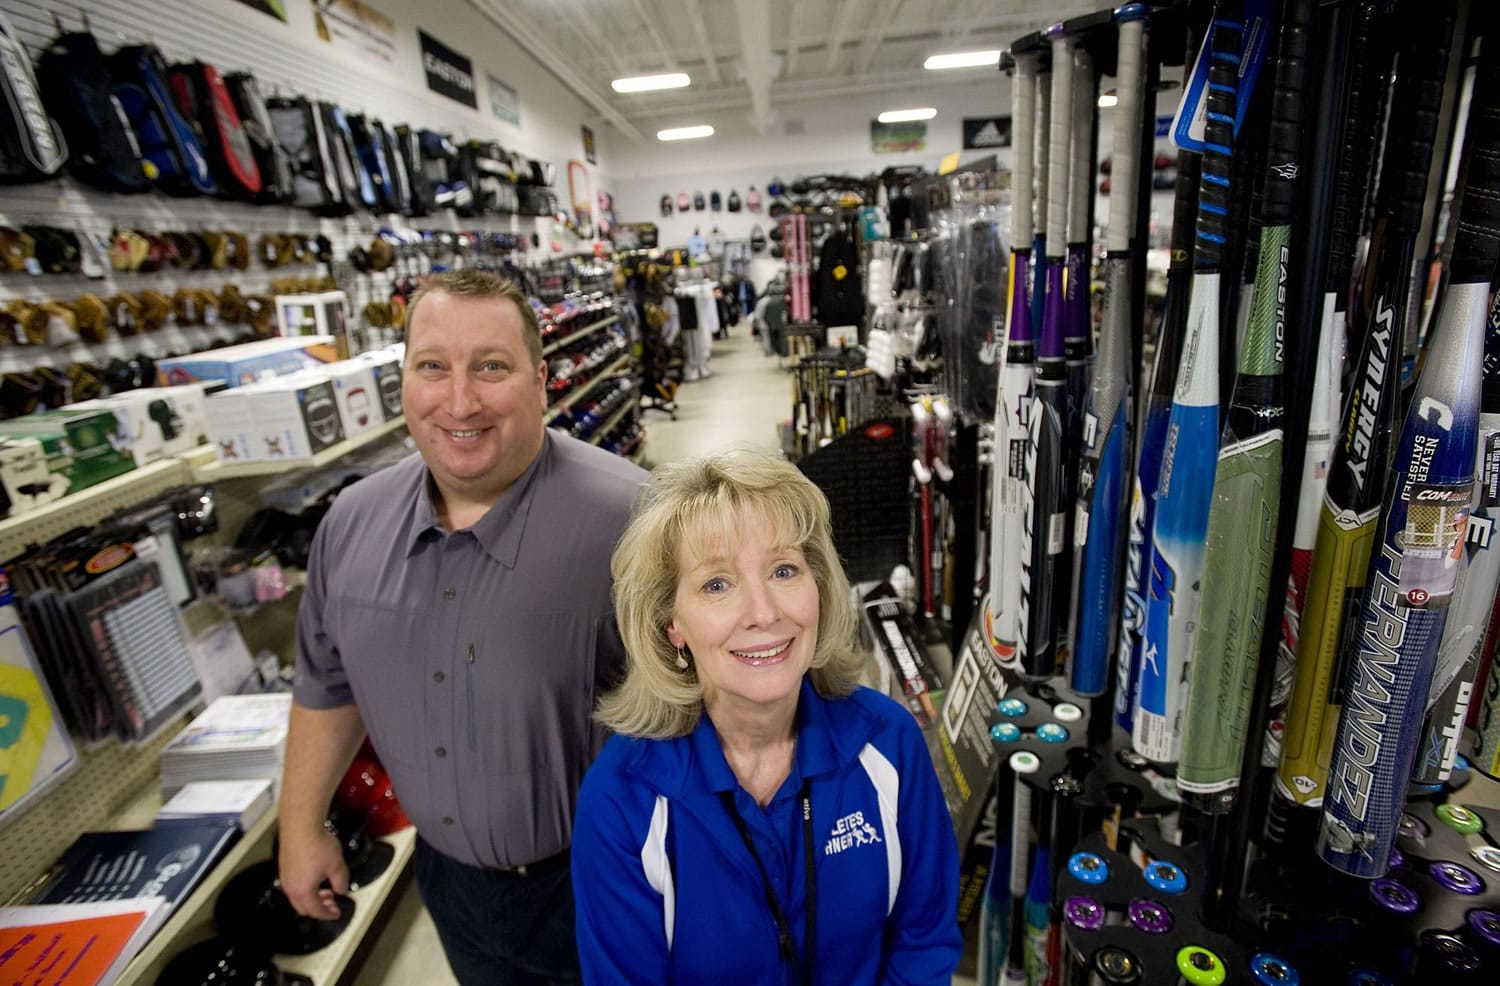 Margaret Jabusch and her son Kirk Jabusch are the owners of Athletes Corner, which has four retail stores selling sporting equipment for young athletes and their parents.